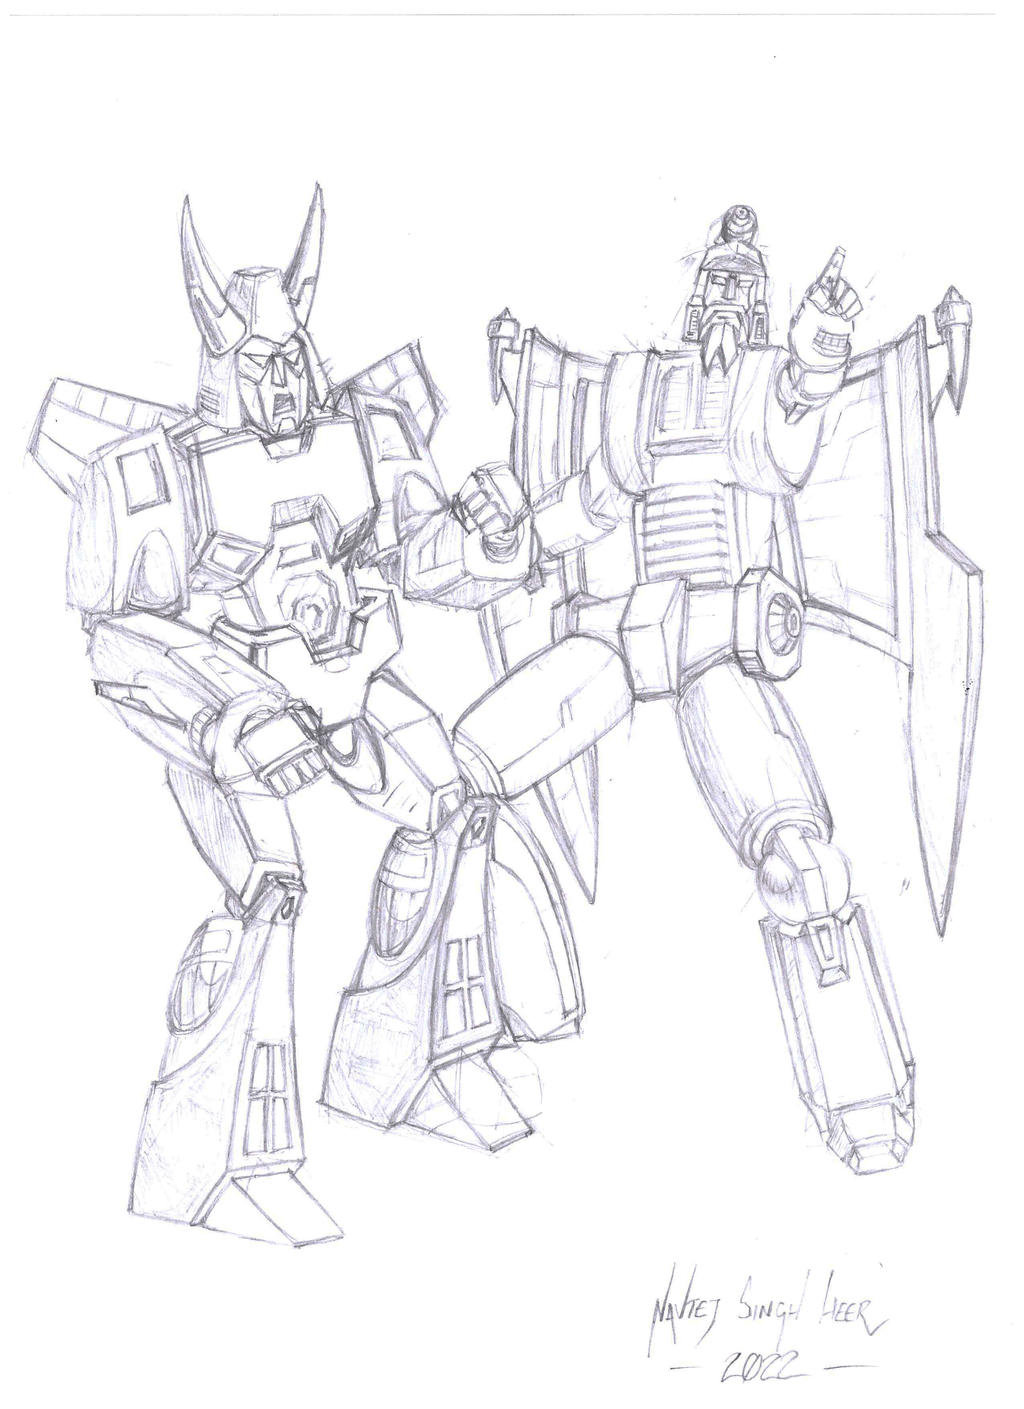 Cyclonus and scourge sketch by hellbat on